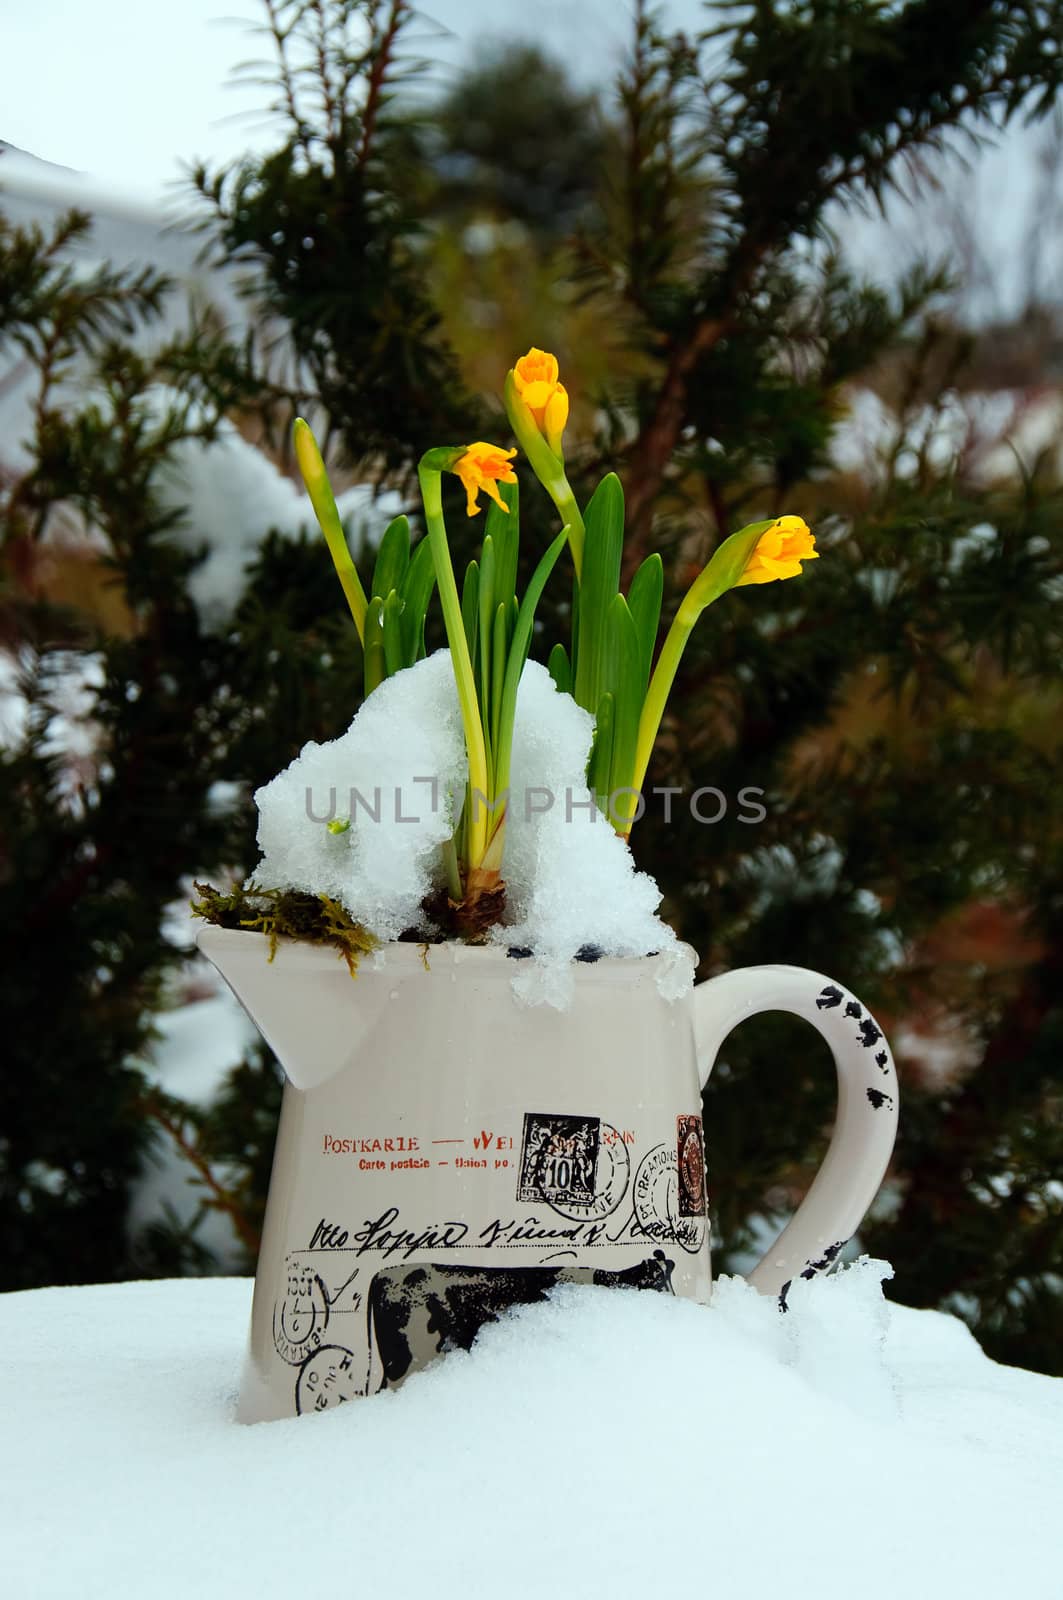 Daffodils covered in snow by GryT